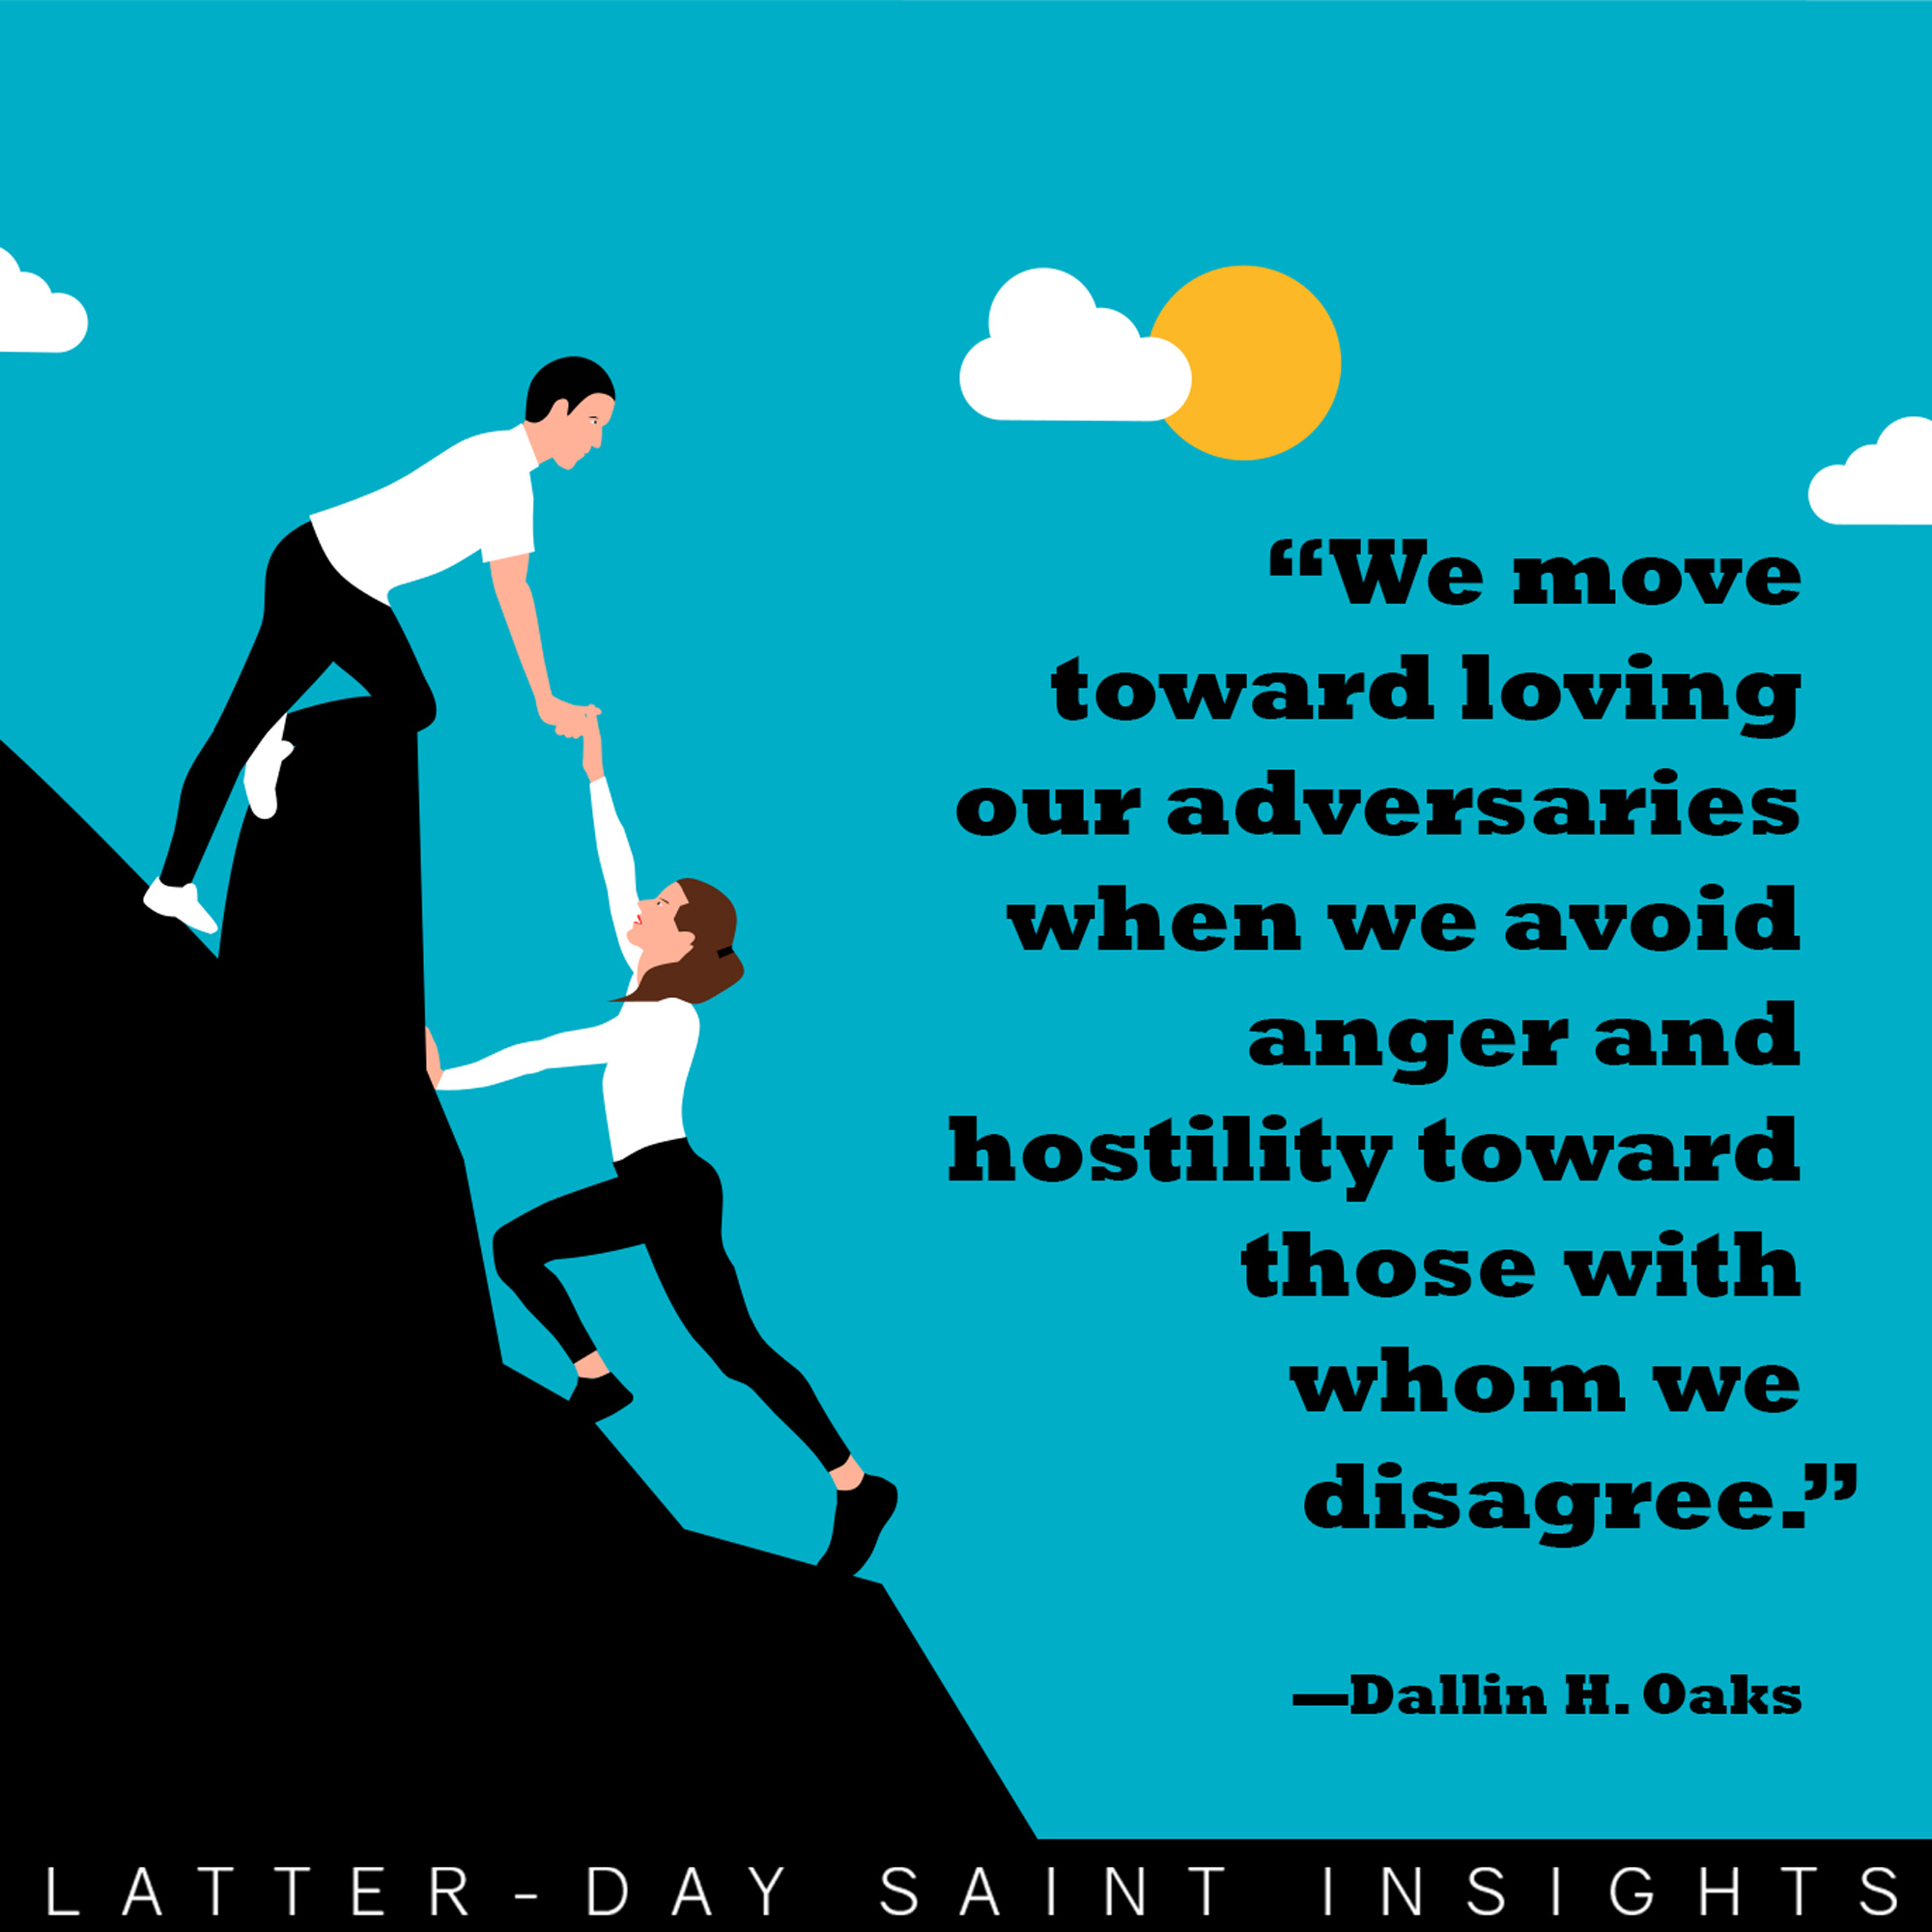 We move toward loving our adversaries when we avoid anger and hostility toward those with whom we disagree. - Dallin H Oaks